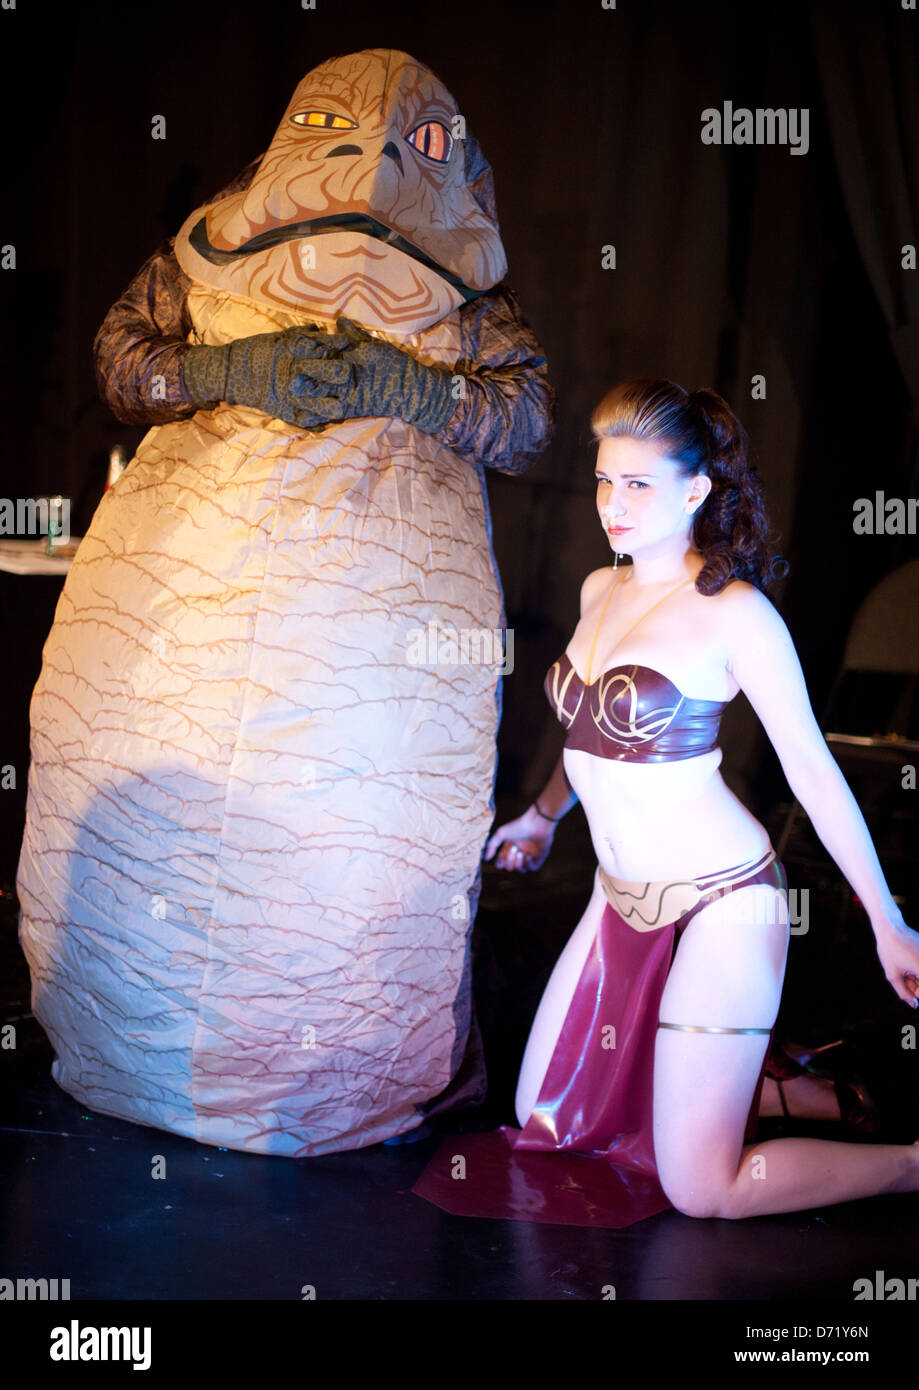 Man in Jabba the Hutt fancy dress with Princess Leia at a Dr Sketchy's burlesque life drawing event Stock Photo